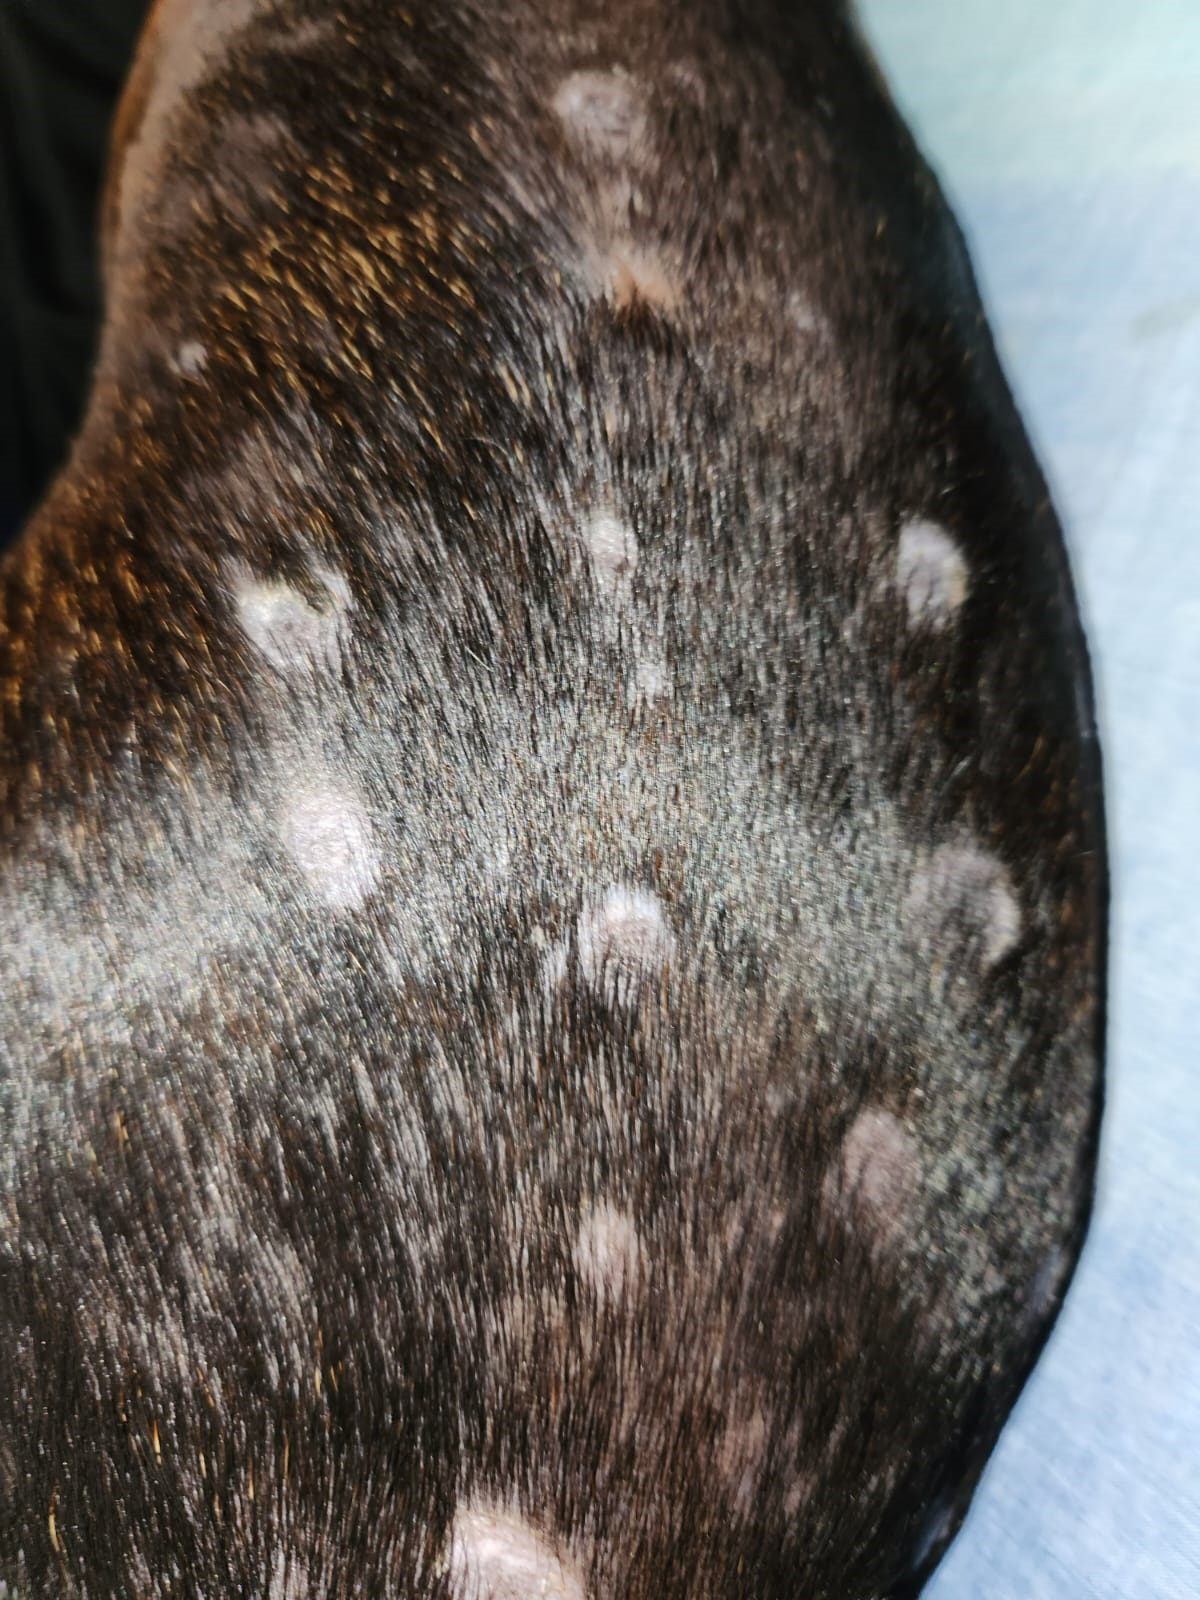 Please help with dog's severe skin problem